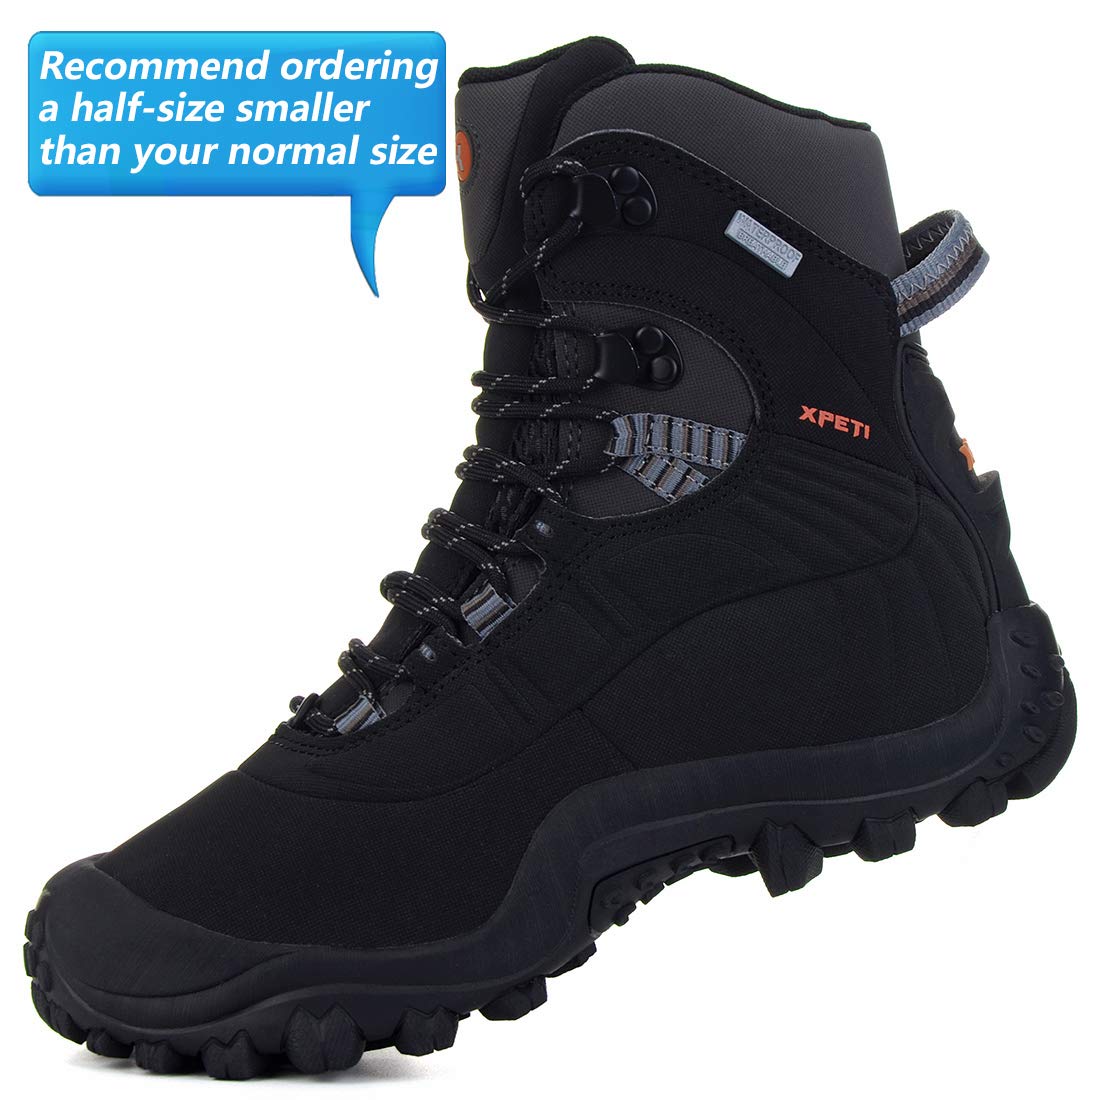 xpeti men's hiking boots